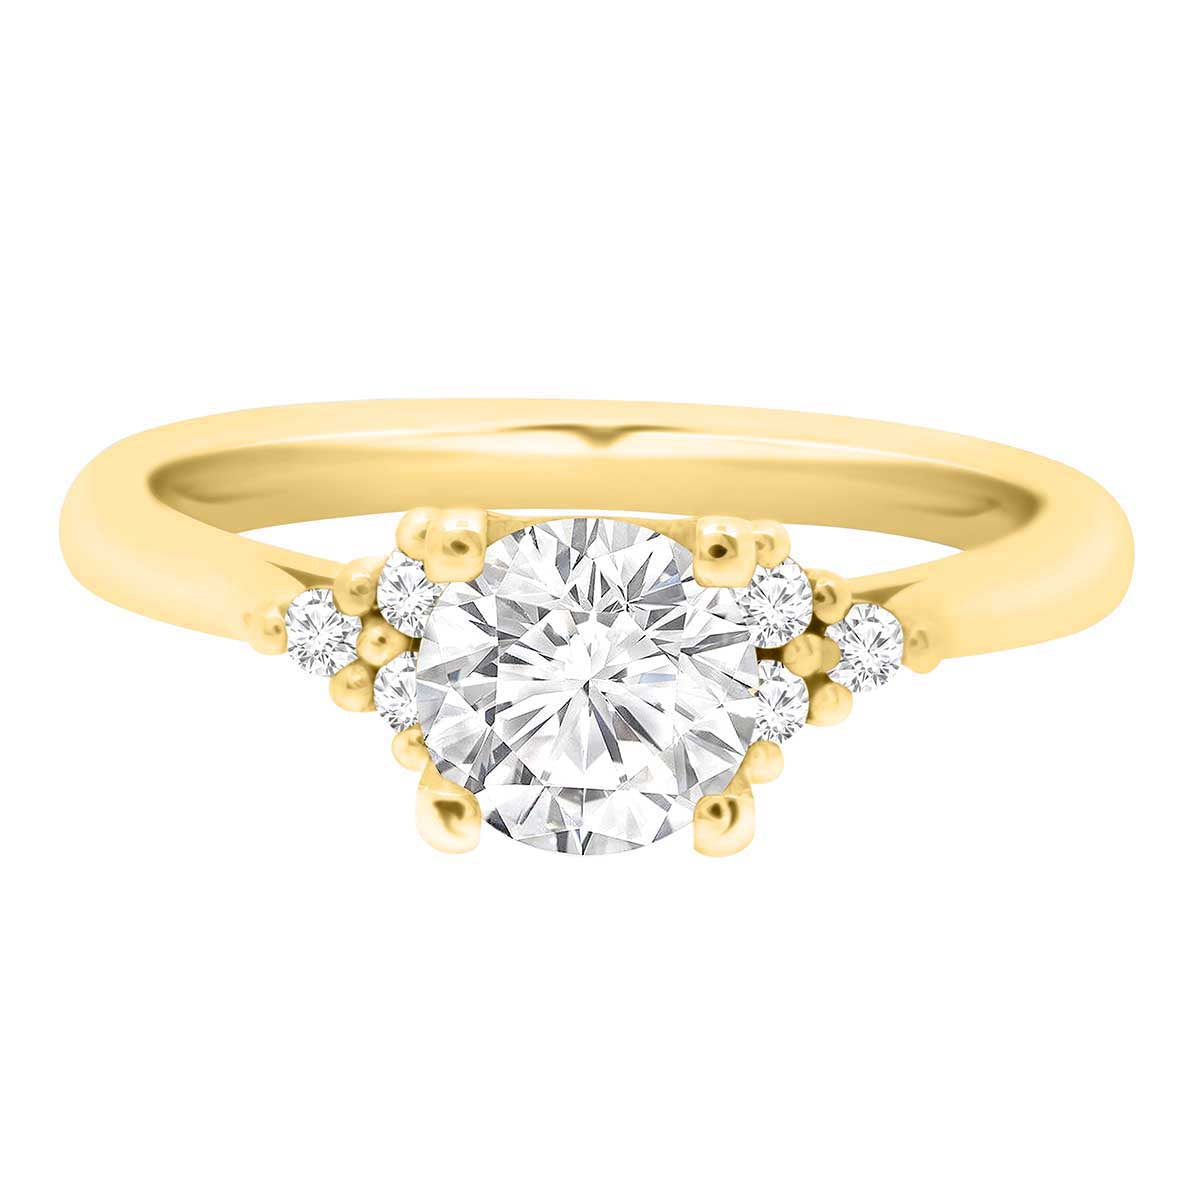 Handmade Engagement Ring in yellow gold